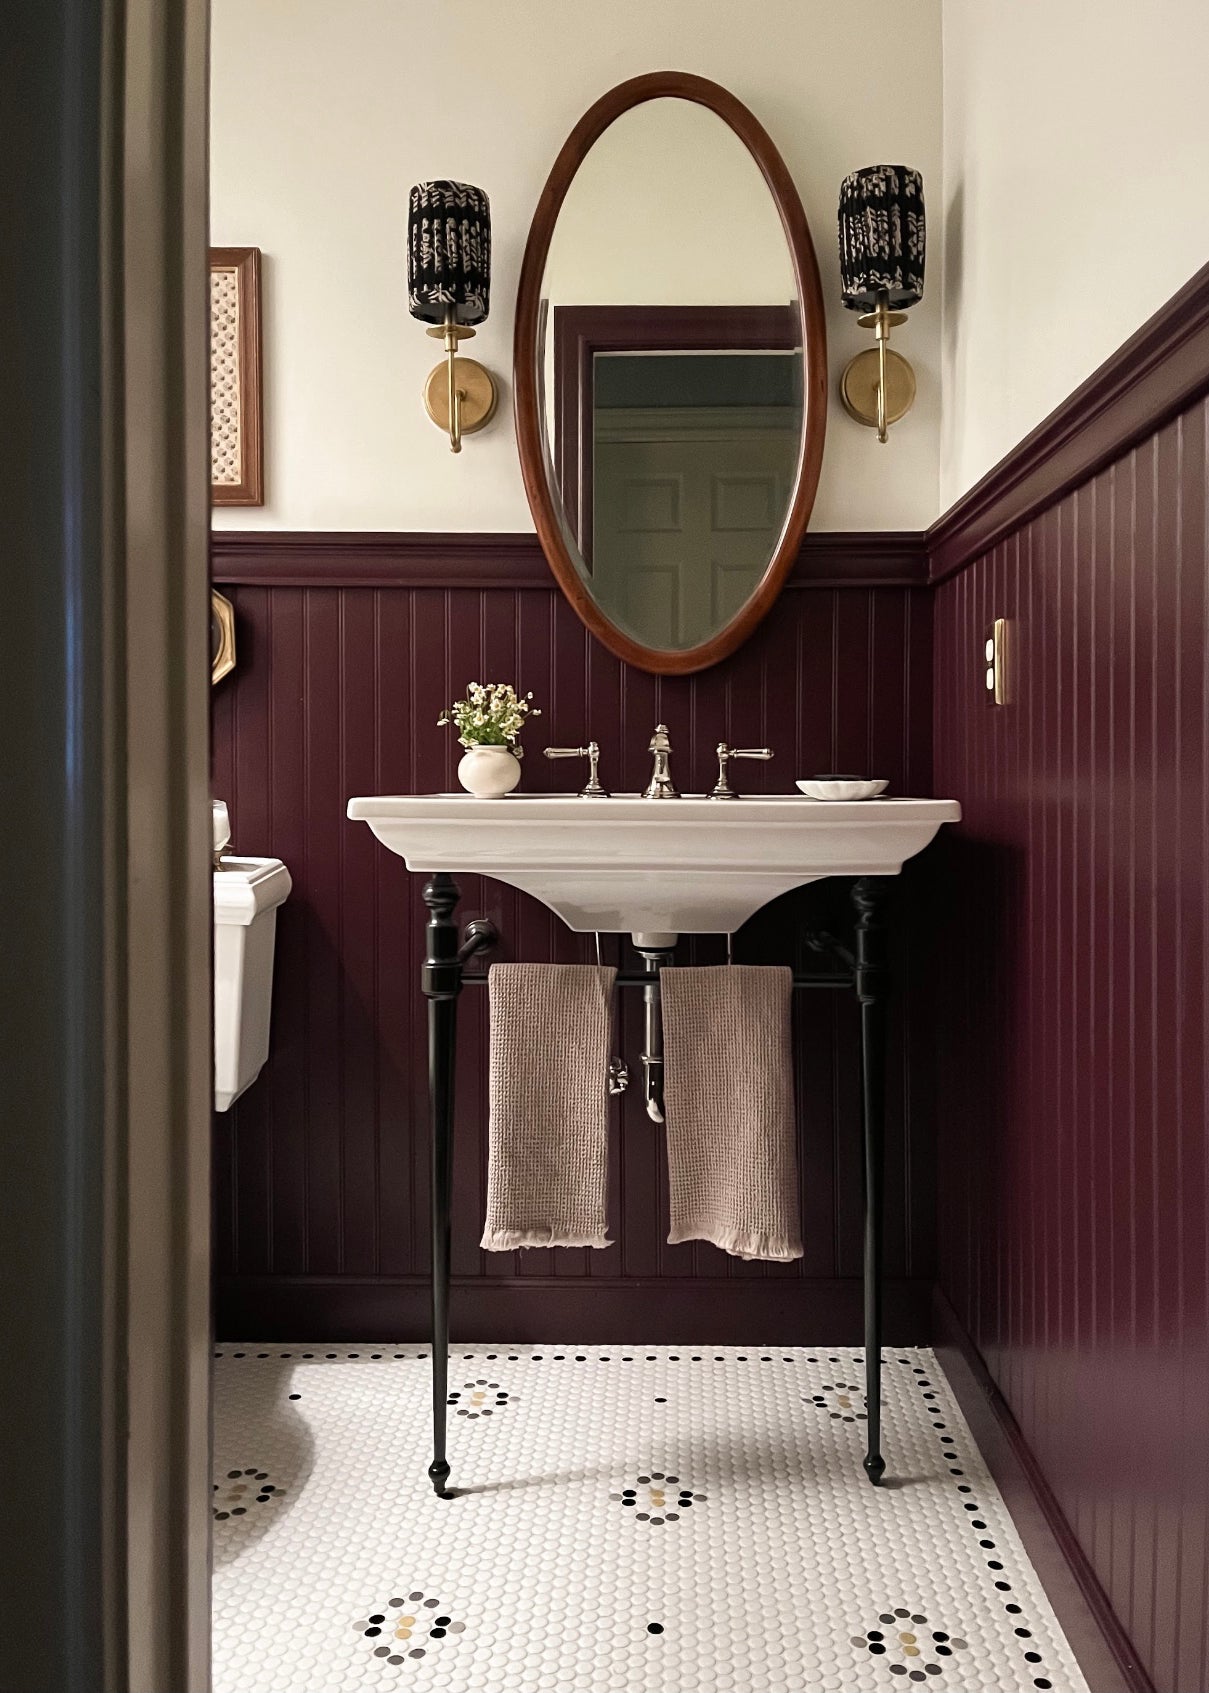 A bathroom with an antique sink and a unique penny round patterned floor.